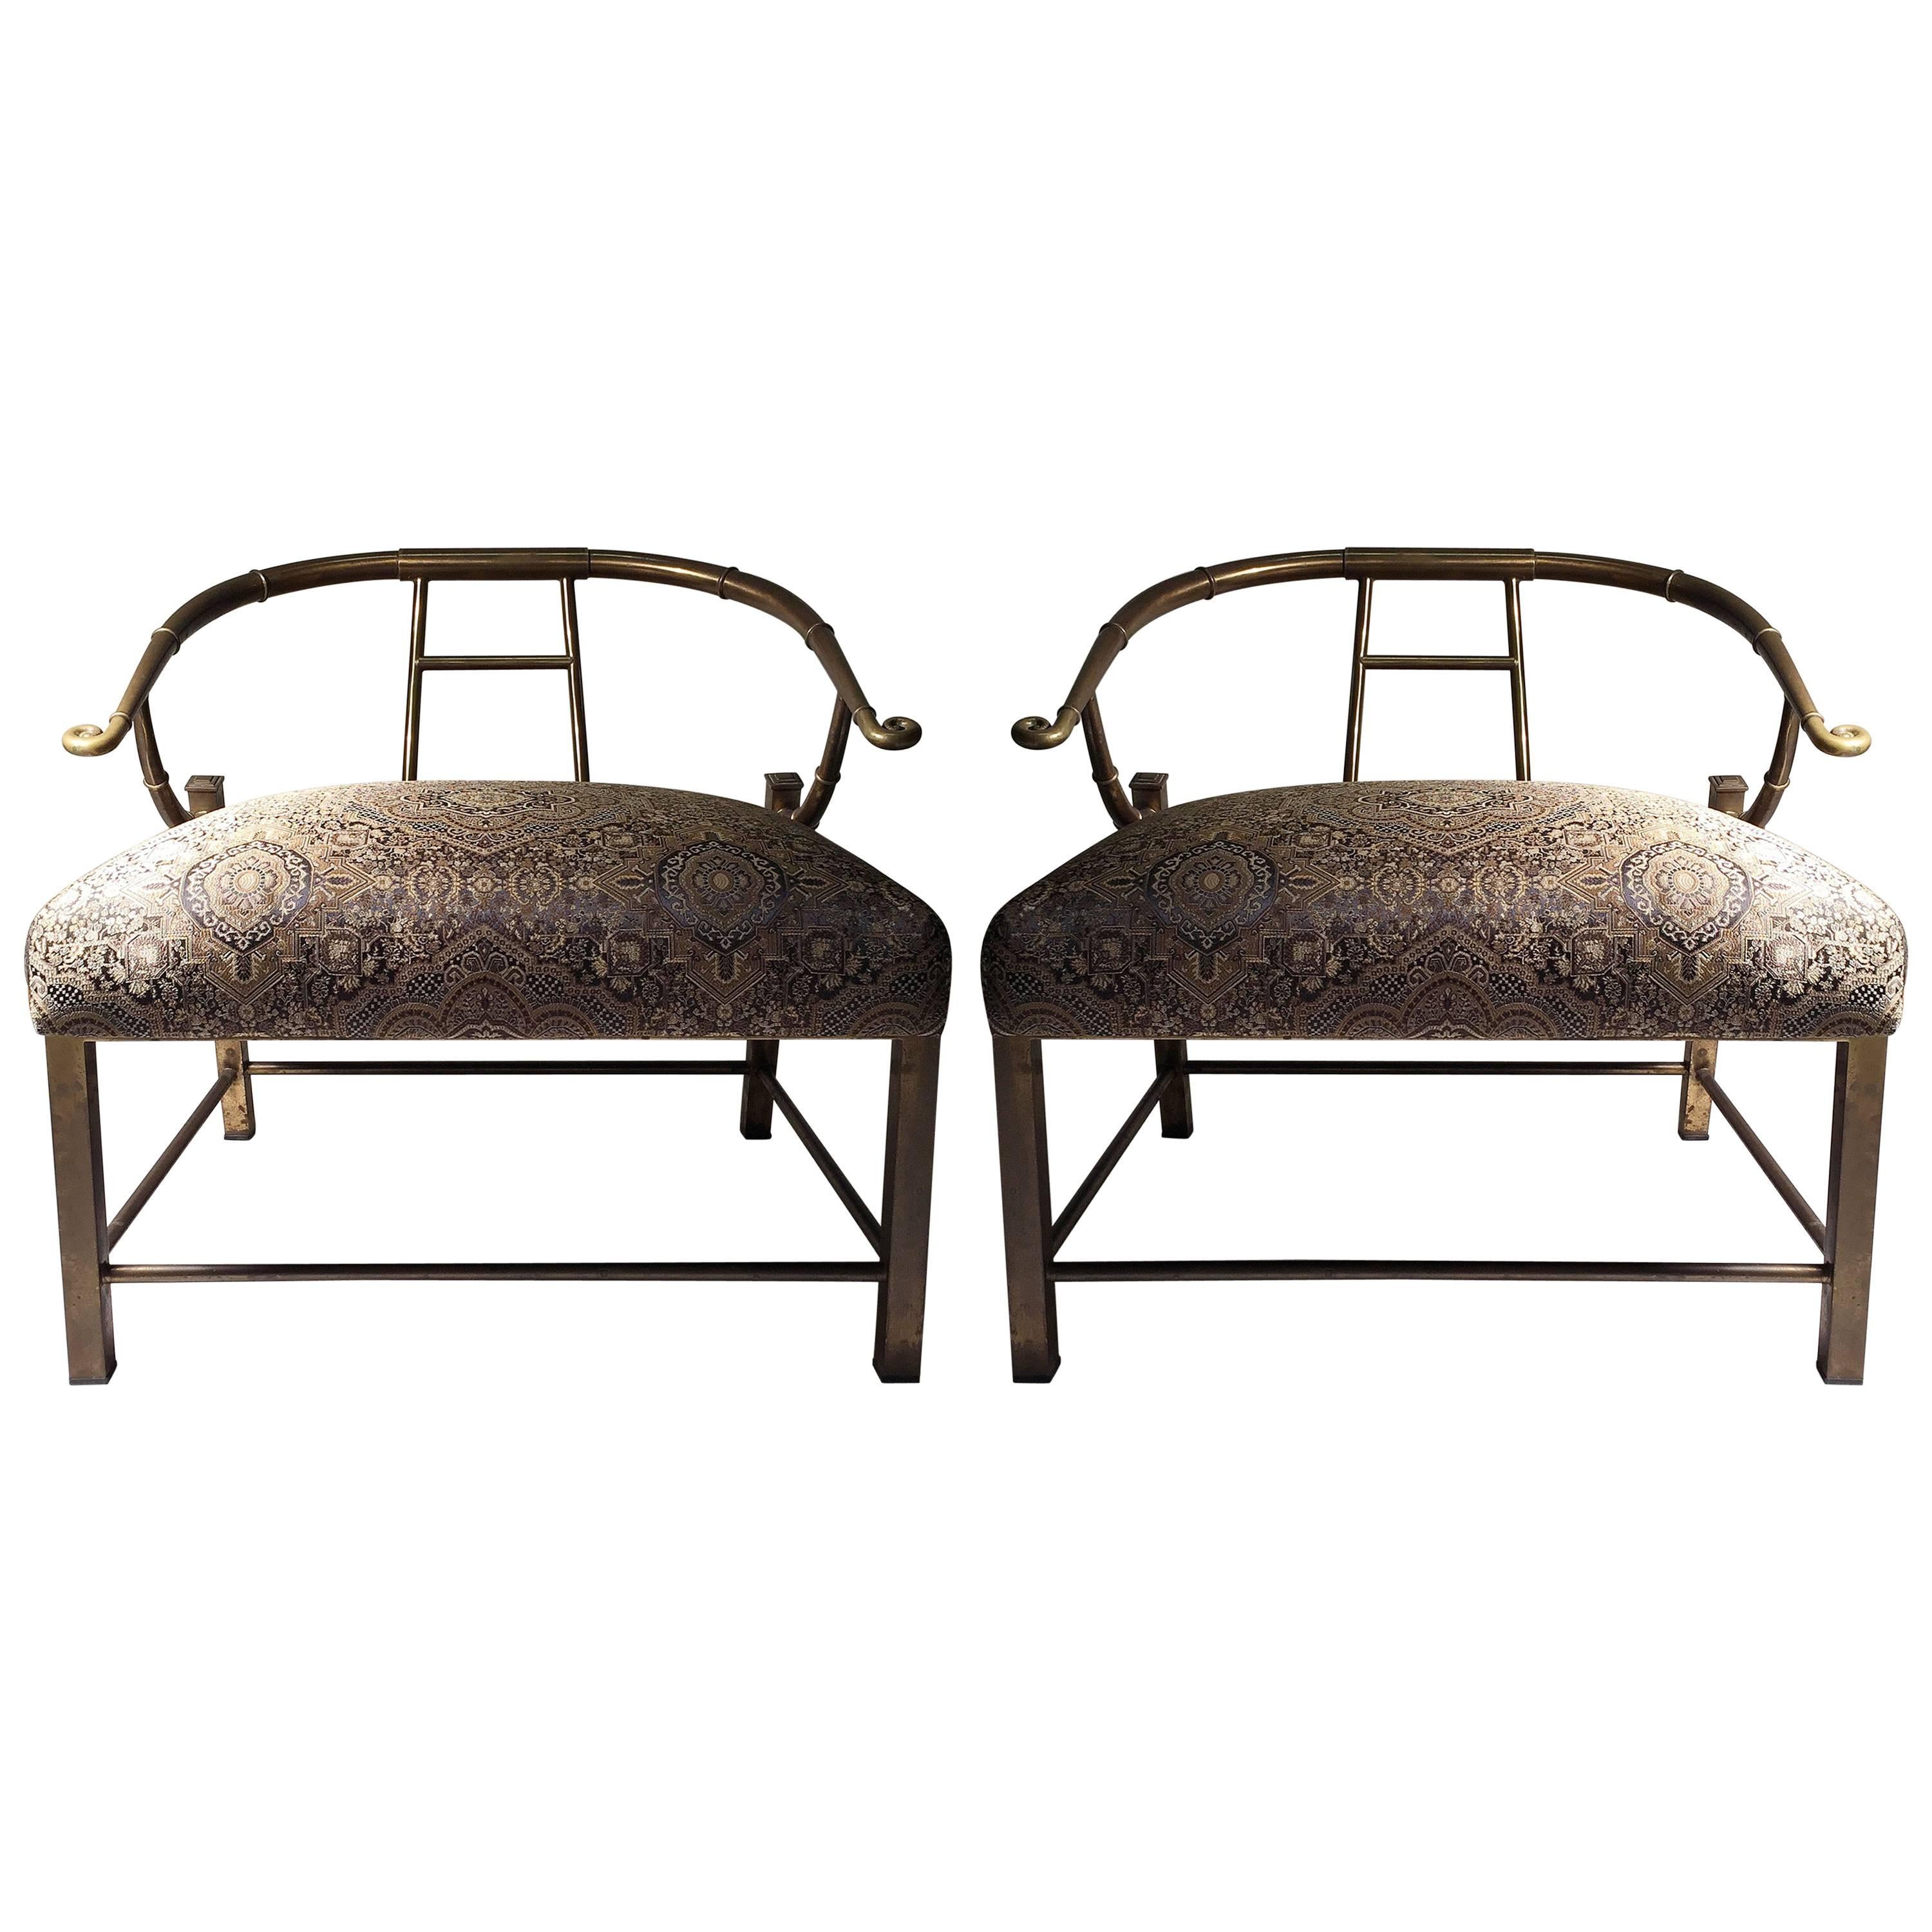 Charles Pengally Mastercraft Brass Chinoiserie Lounge Chairs